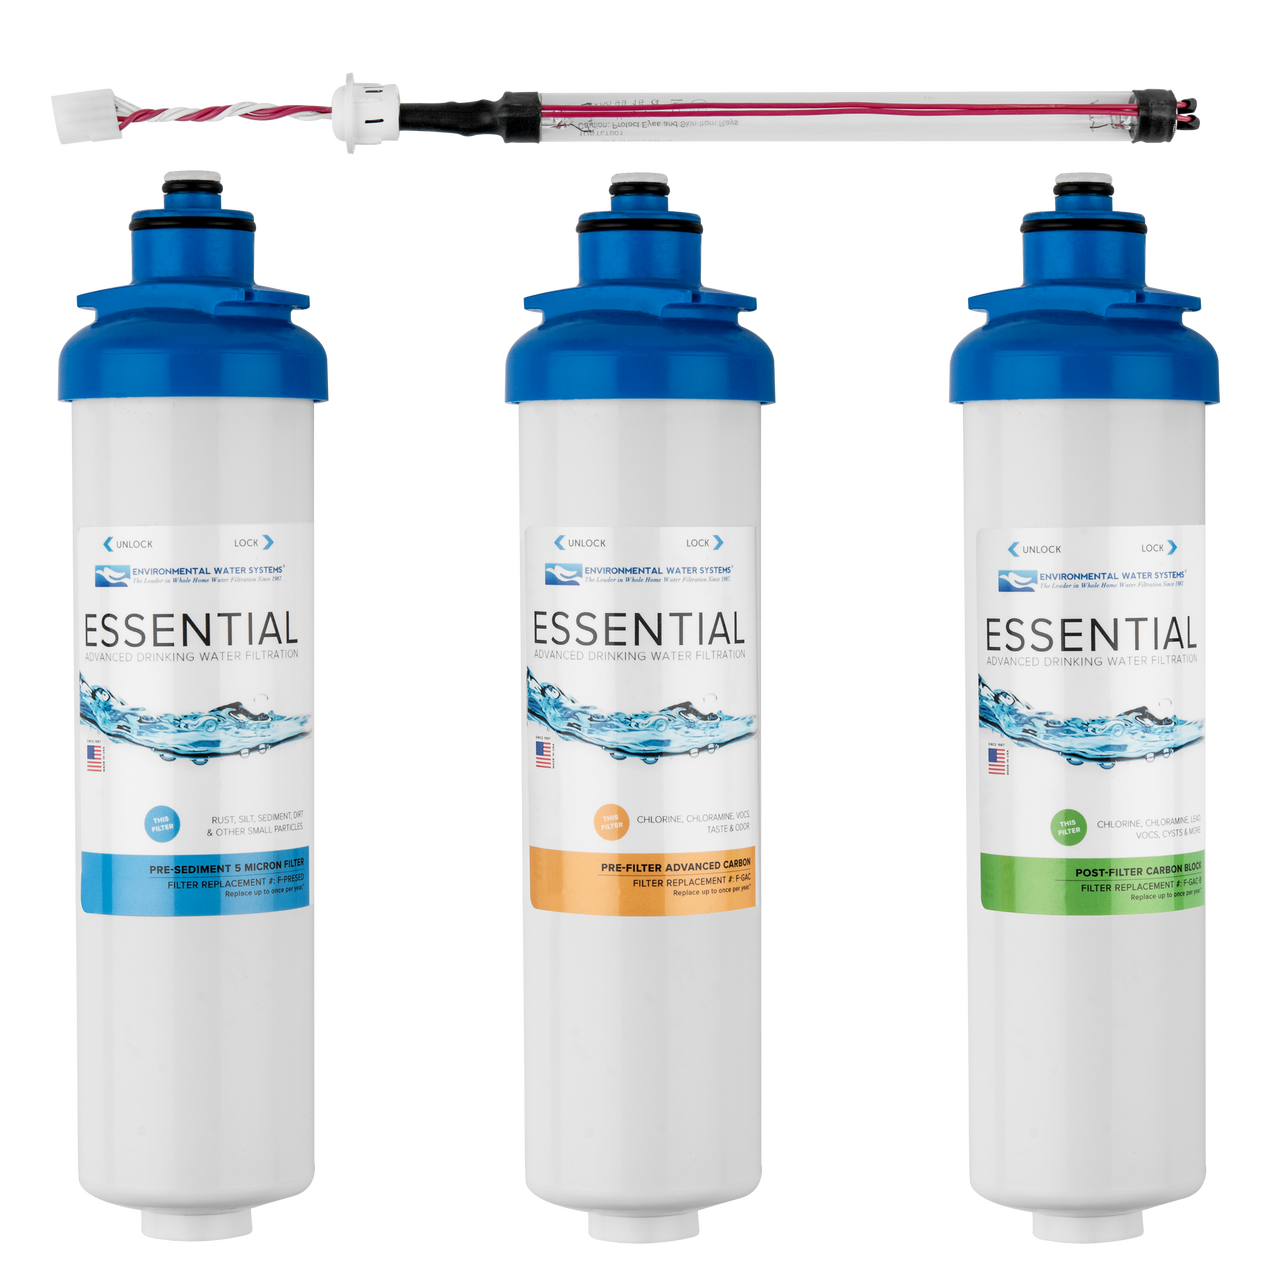 Complete Filter Set for ESSENTIAL Drinking Water System with UV (Filter Set #: F.SET DWS-UV)